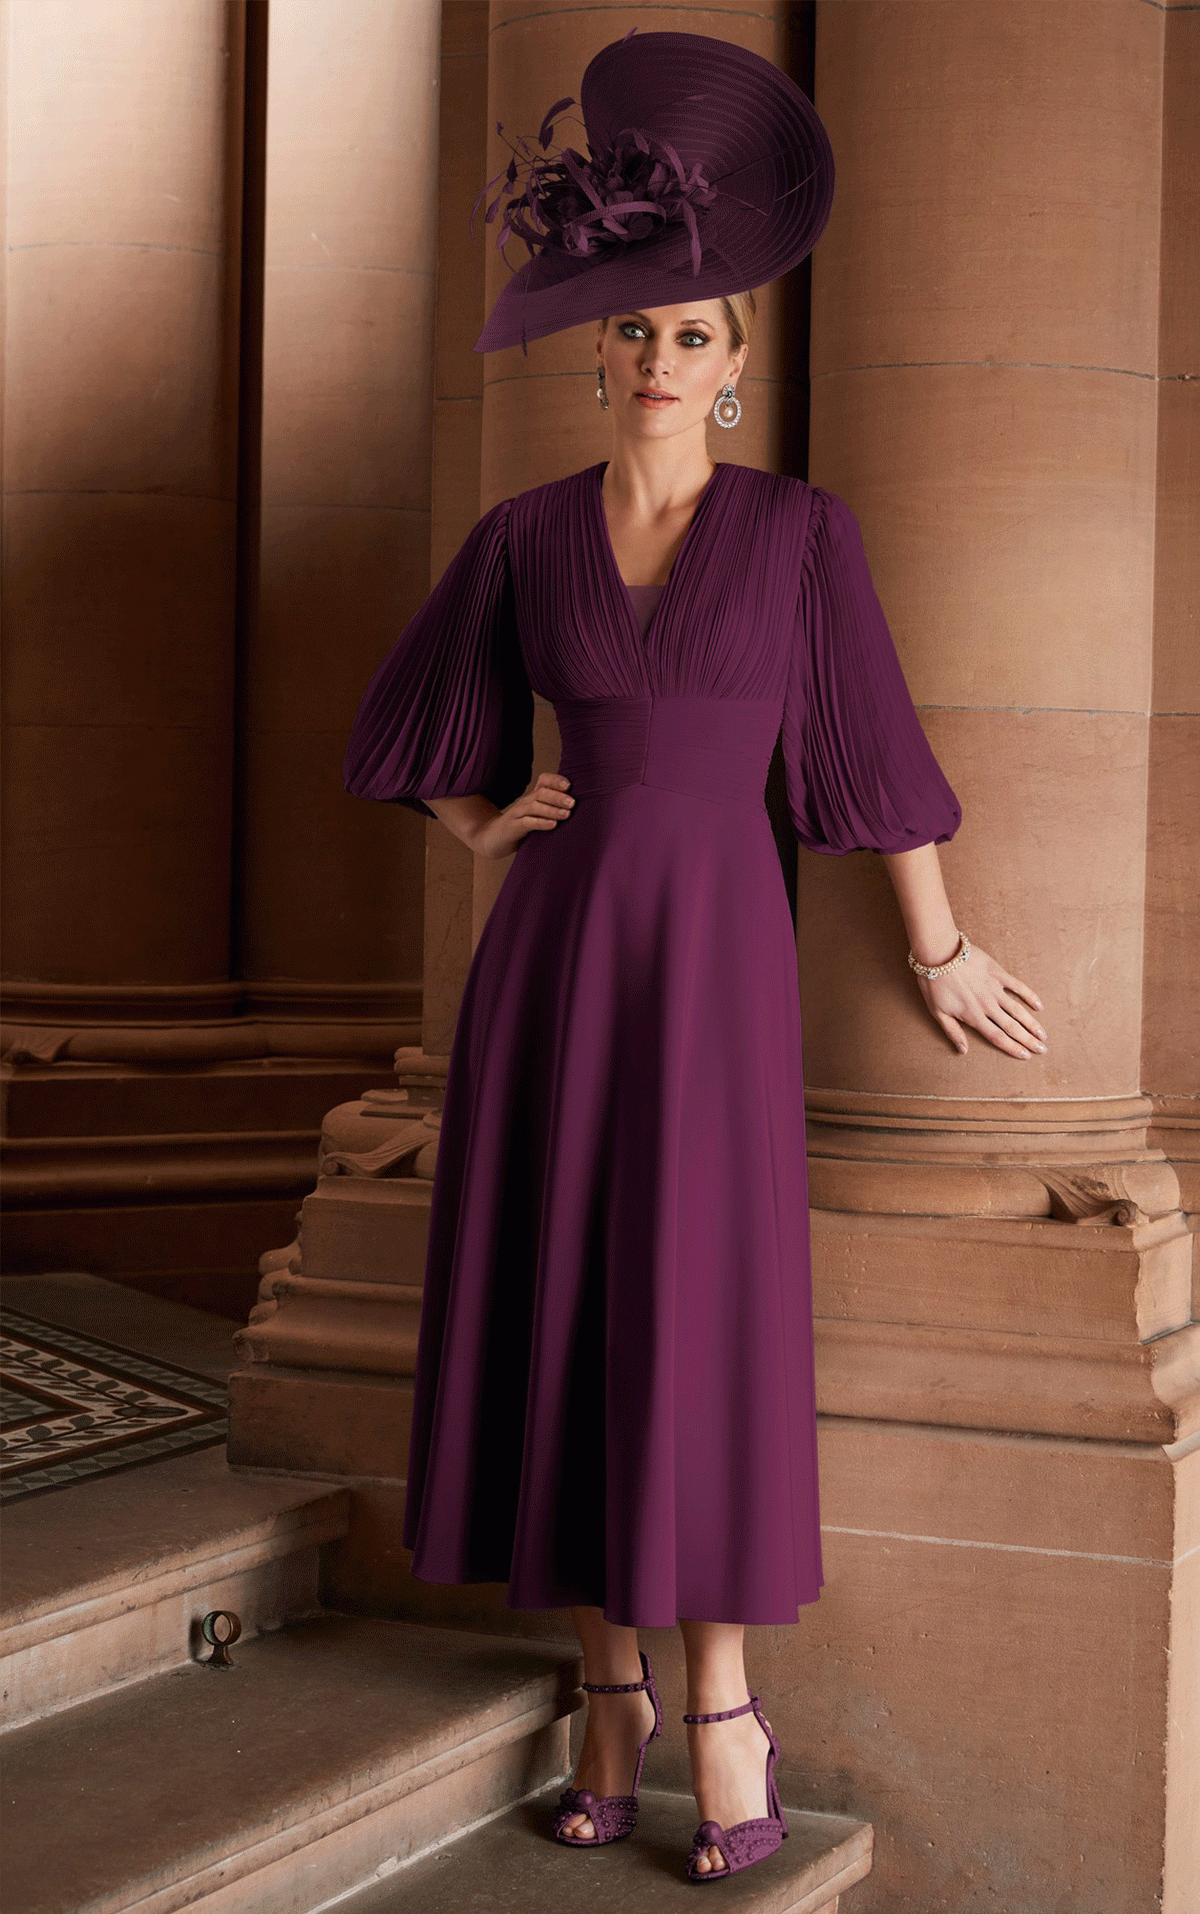 Invitations - 29651 - Veni Infantino 29651  Dark Purple Chiffon long dress with  sleeves - Stunning Mother of the Bride & Mother of the Groom dresses at Occasions by Blessings, Loyal Parade, Mill Rise, Westdene, Brighton. East Sussex BN1 5GG T: 01273 505766 E: Occasions@blessingsbridal.co.uk